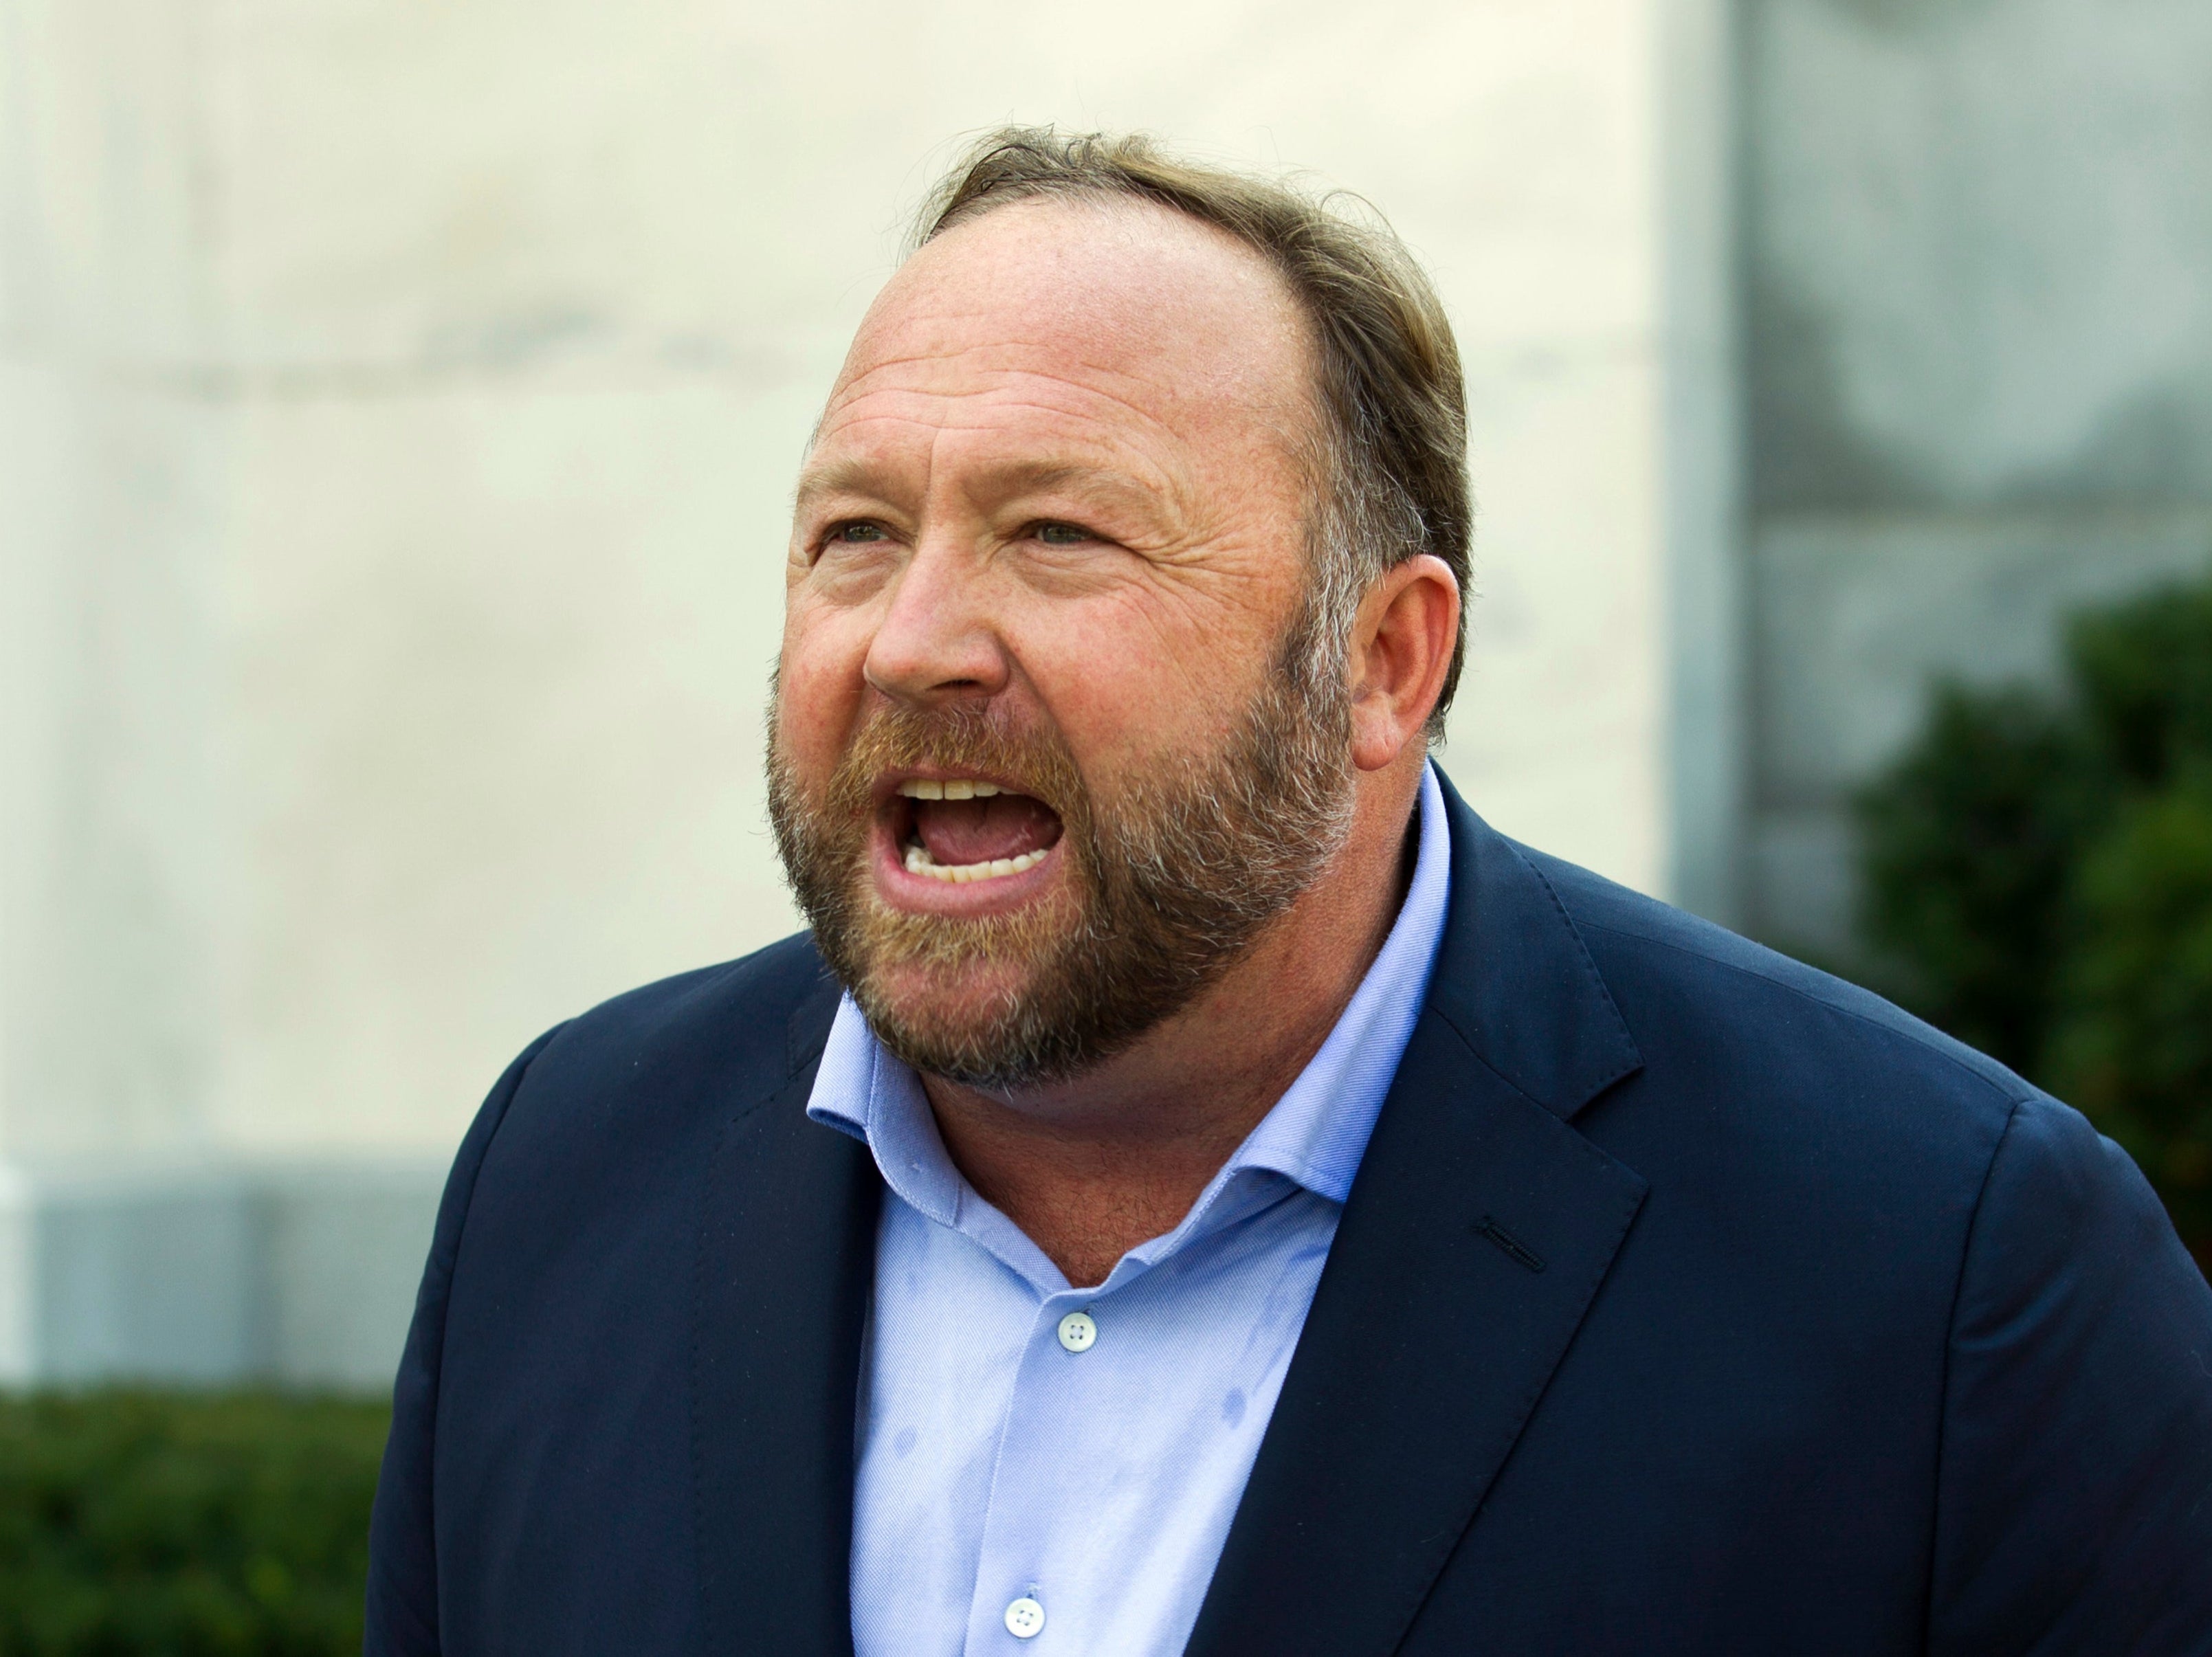 Far-right conspiracy theorist Alex Jones is being deposed for a lawsuit brought by Sandy Hook families